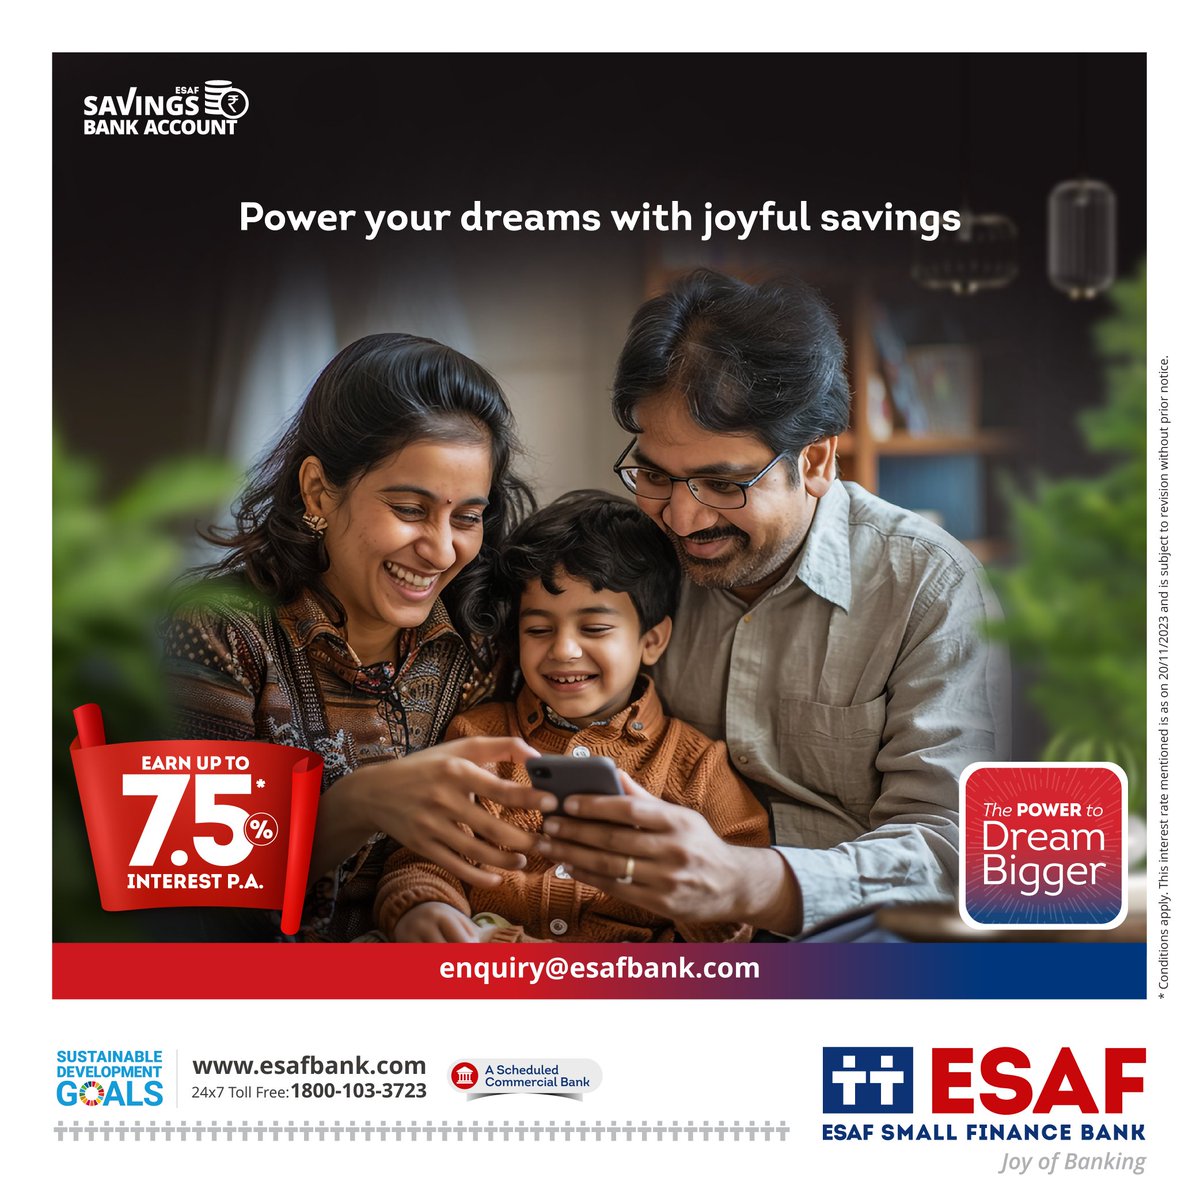 Witness the joyous moment of your dreams being fulfilled with ESAF Small Finance Bank’s Savings Bank Account. #savingsaccount #thepowertodreambigger #ESAFBank #JoyOfBanking